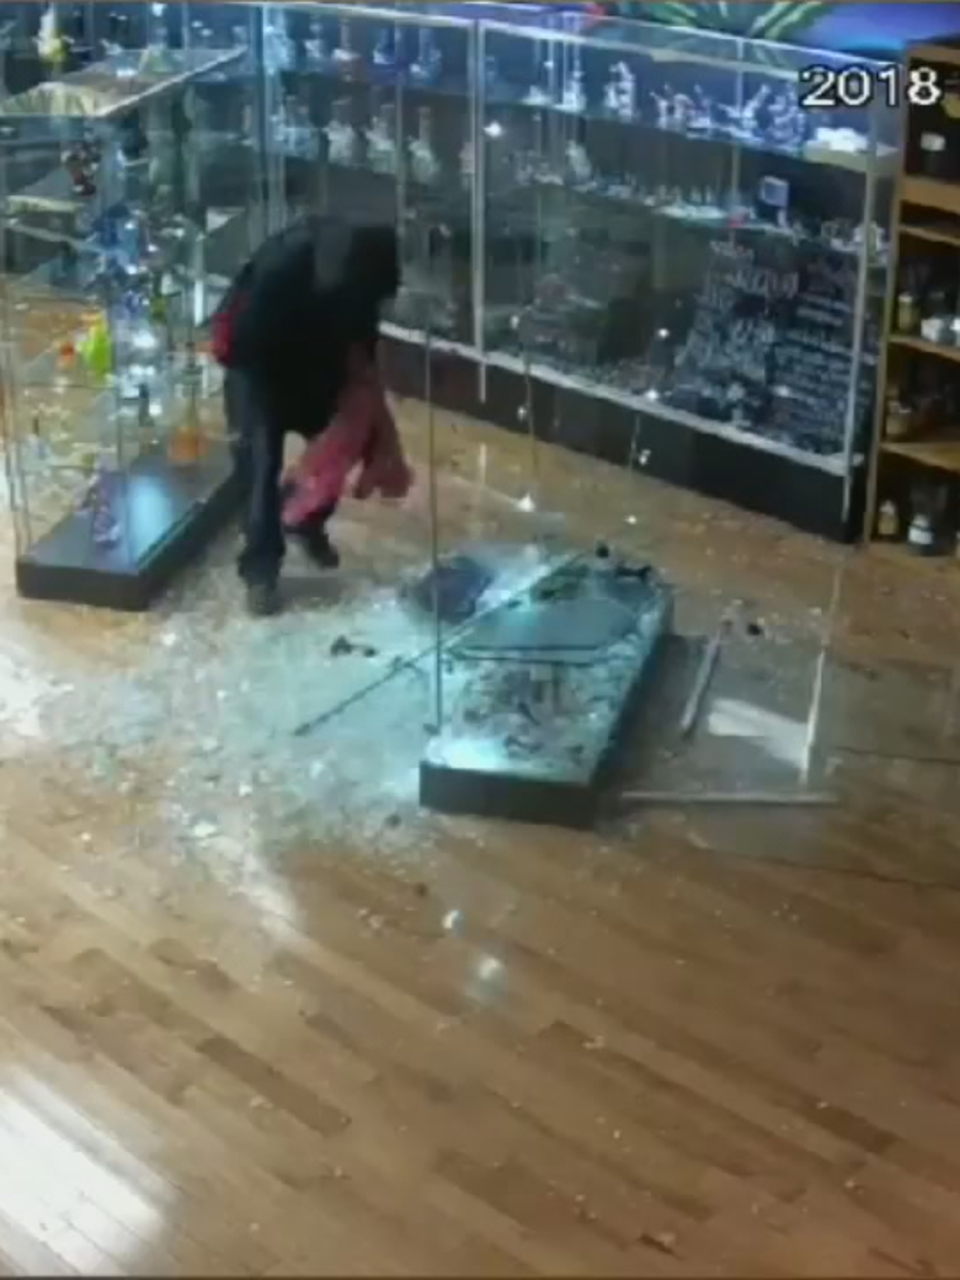 Watch Thieves Use Hammers In Series Of Smash And Grab Burglaries